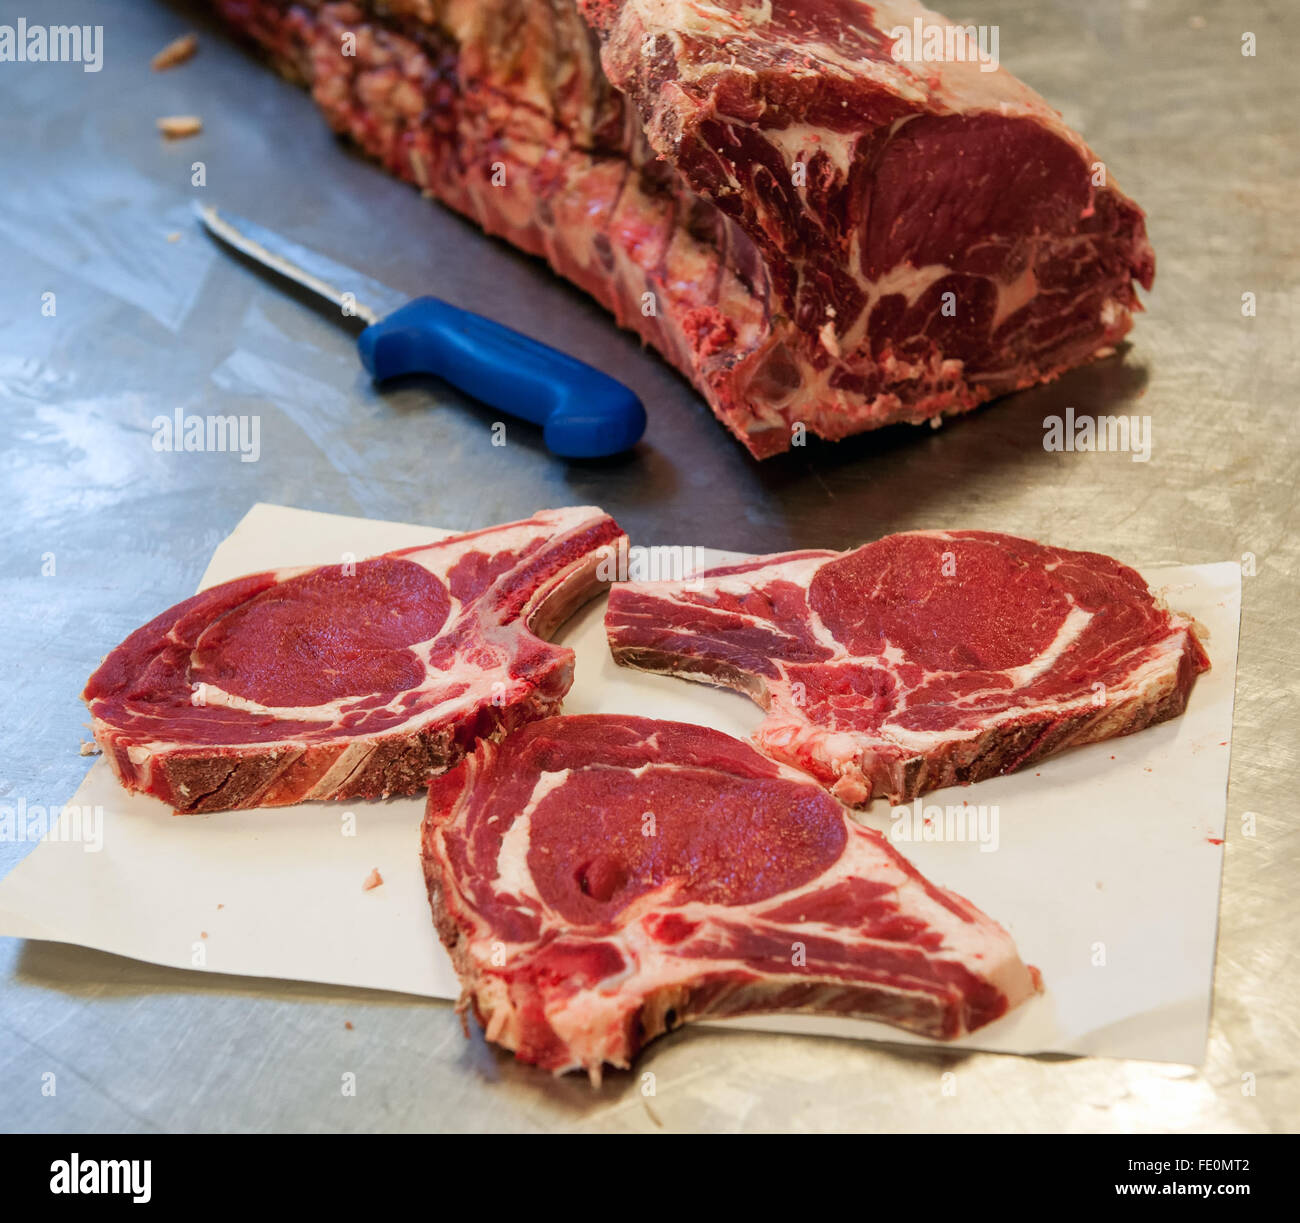 Three slices of raw rib eye steak over butcher paper sheet next to knife and meat section on metal table Stock Photo